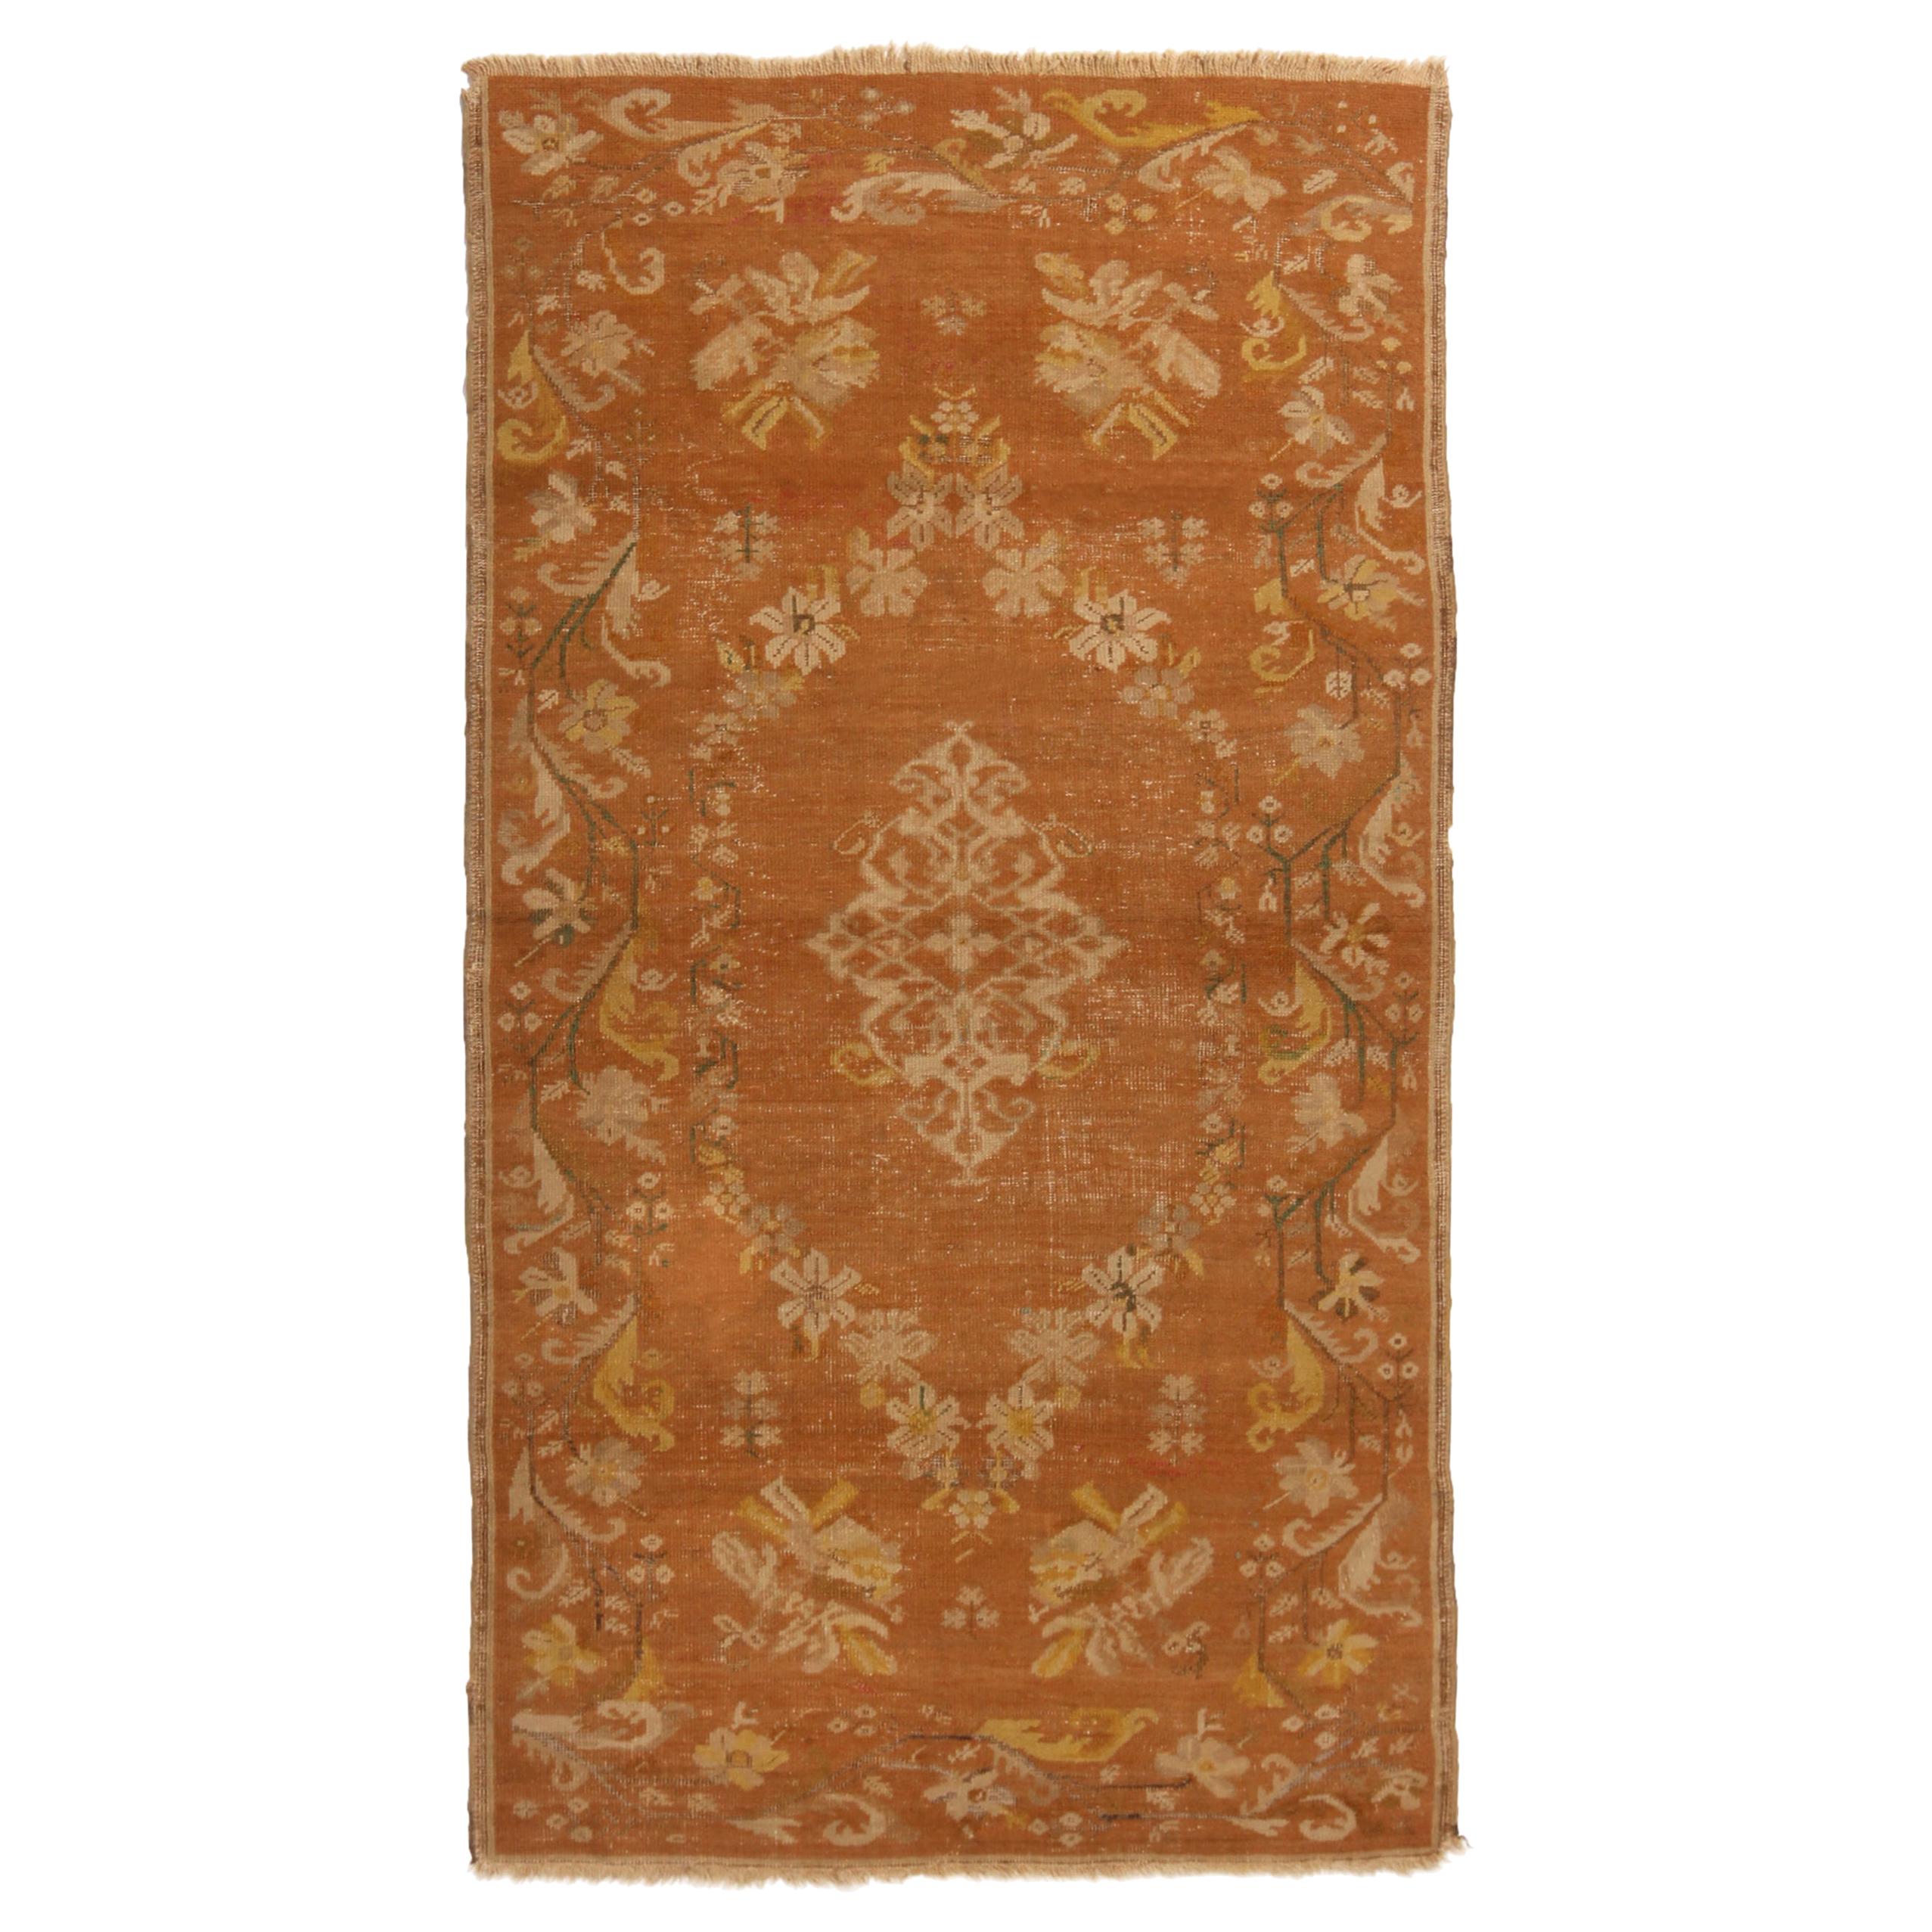 Antique Gordes Traditional Beige and Copper Wool Rug Floral by Rug & Kilim